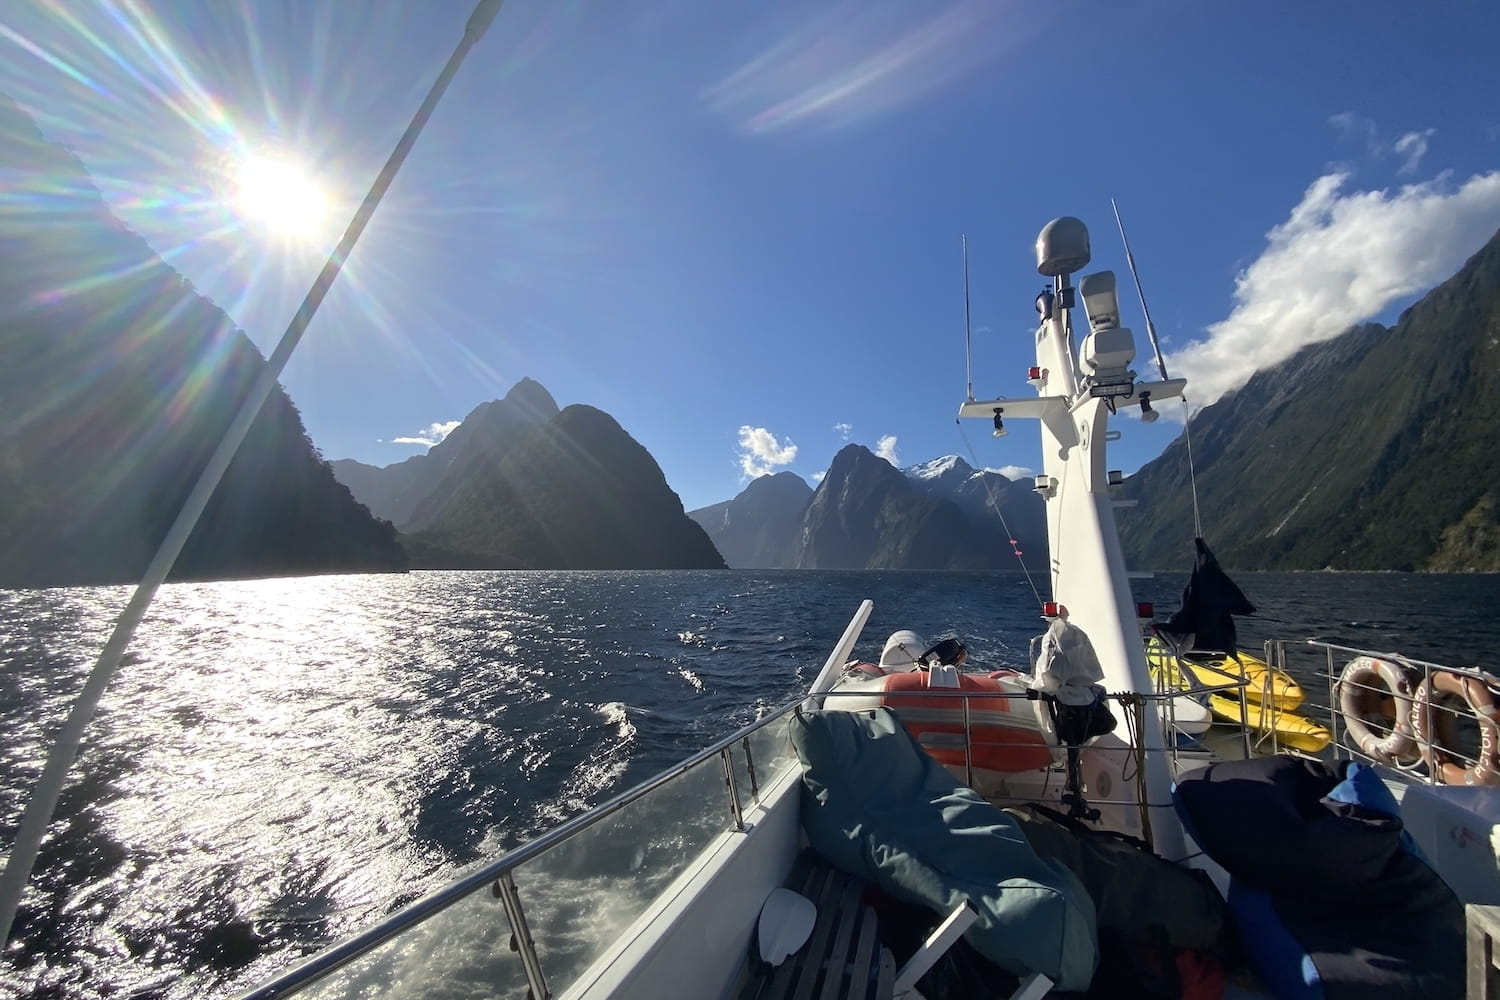 Amazing views from the Galileo within Milford Sound